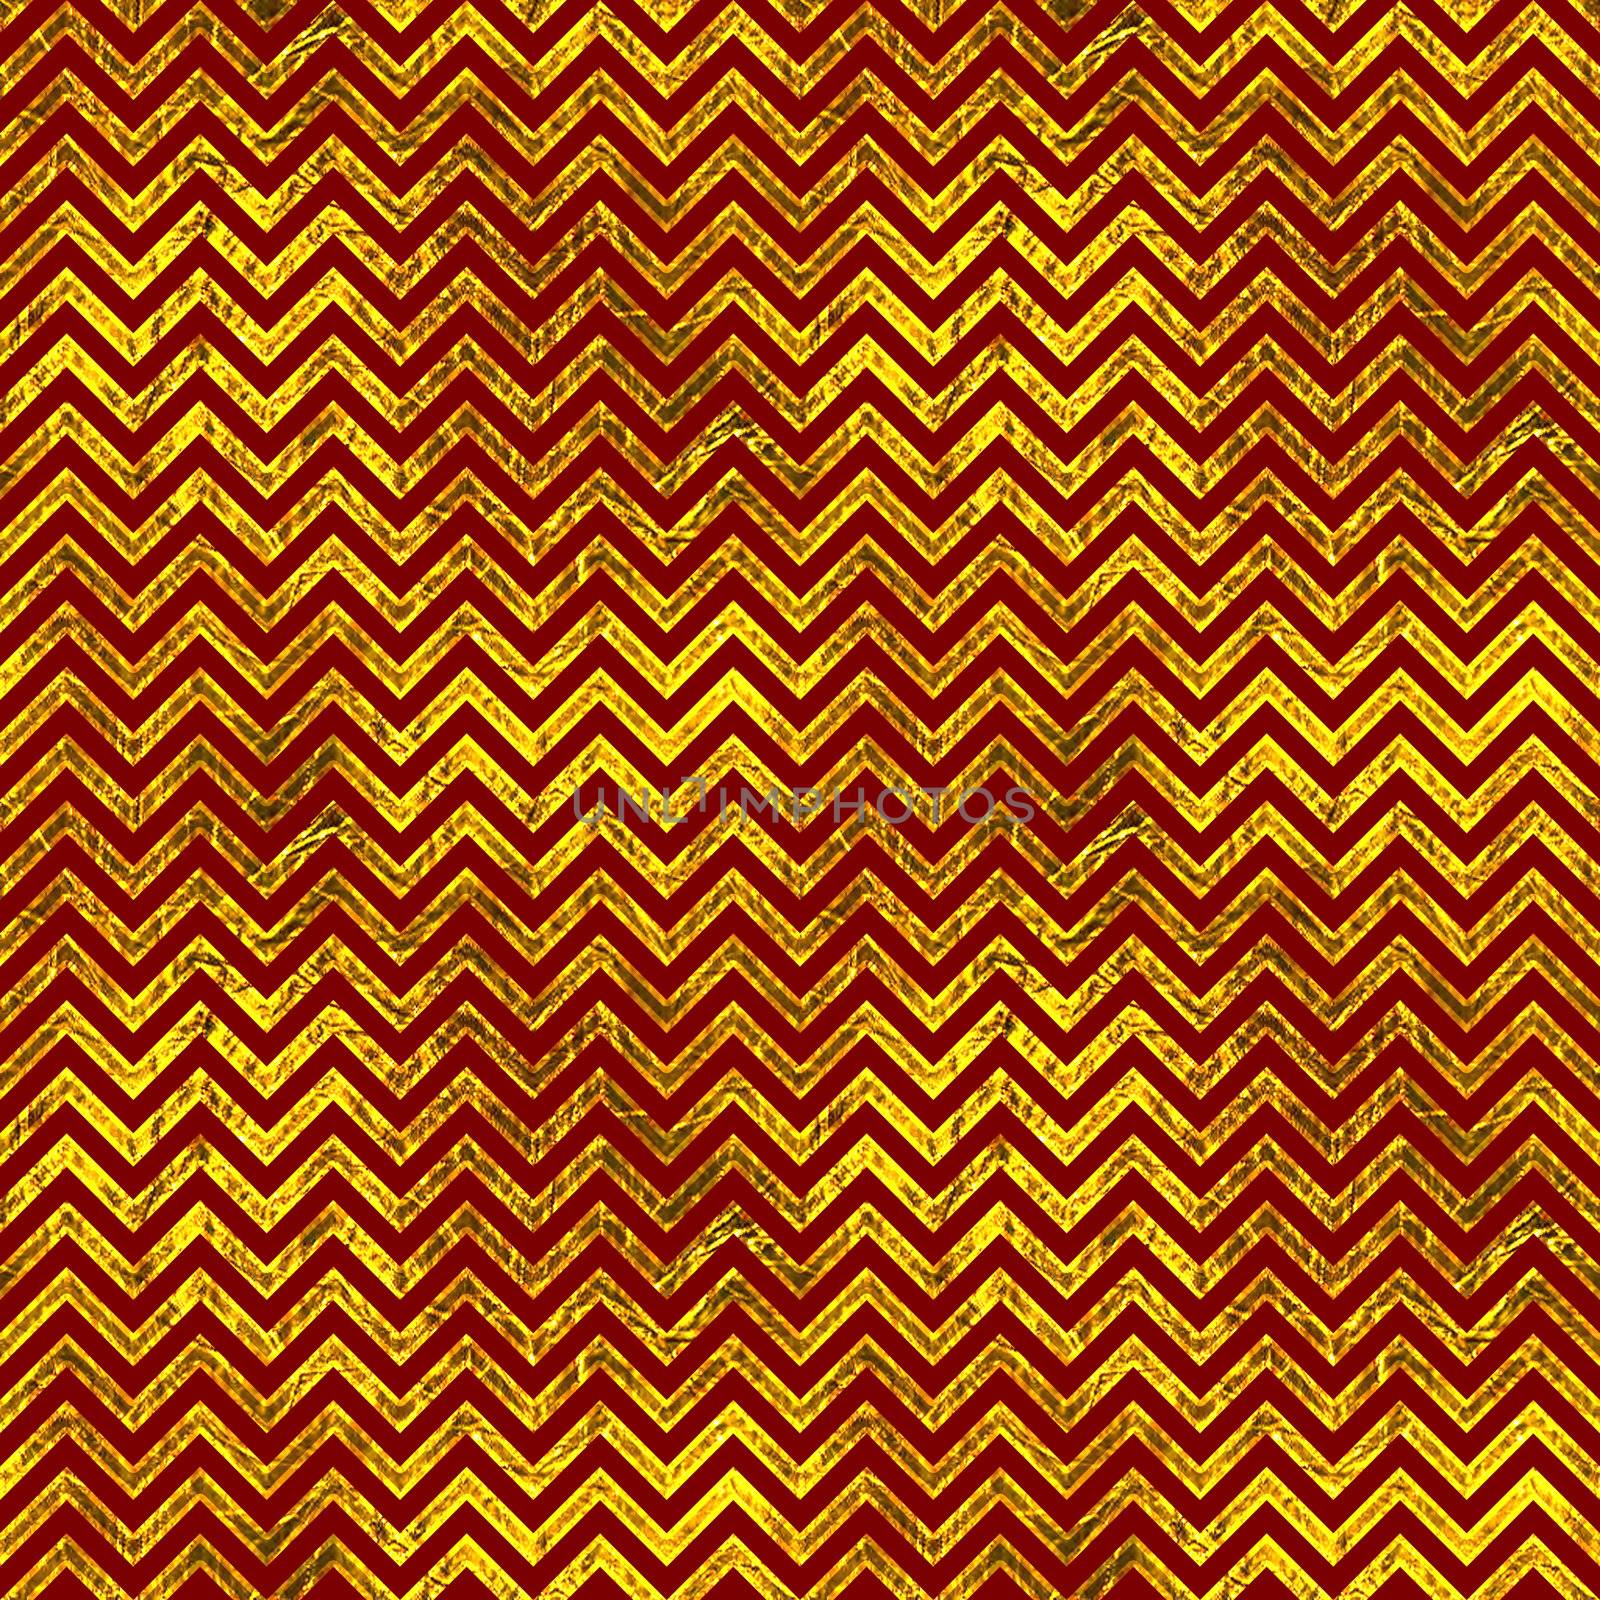 Red & Gold Chevron Pattern by SongPixels